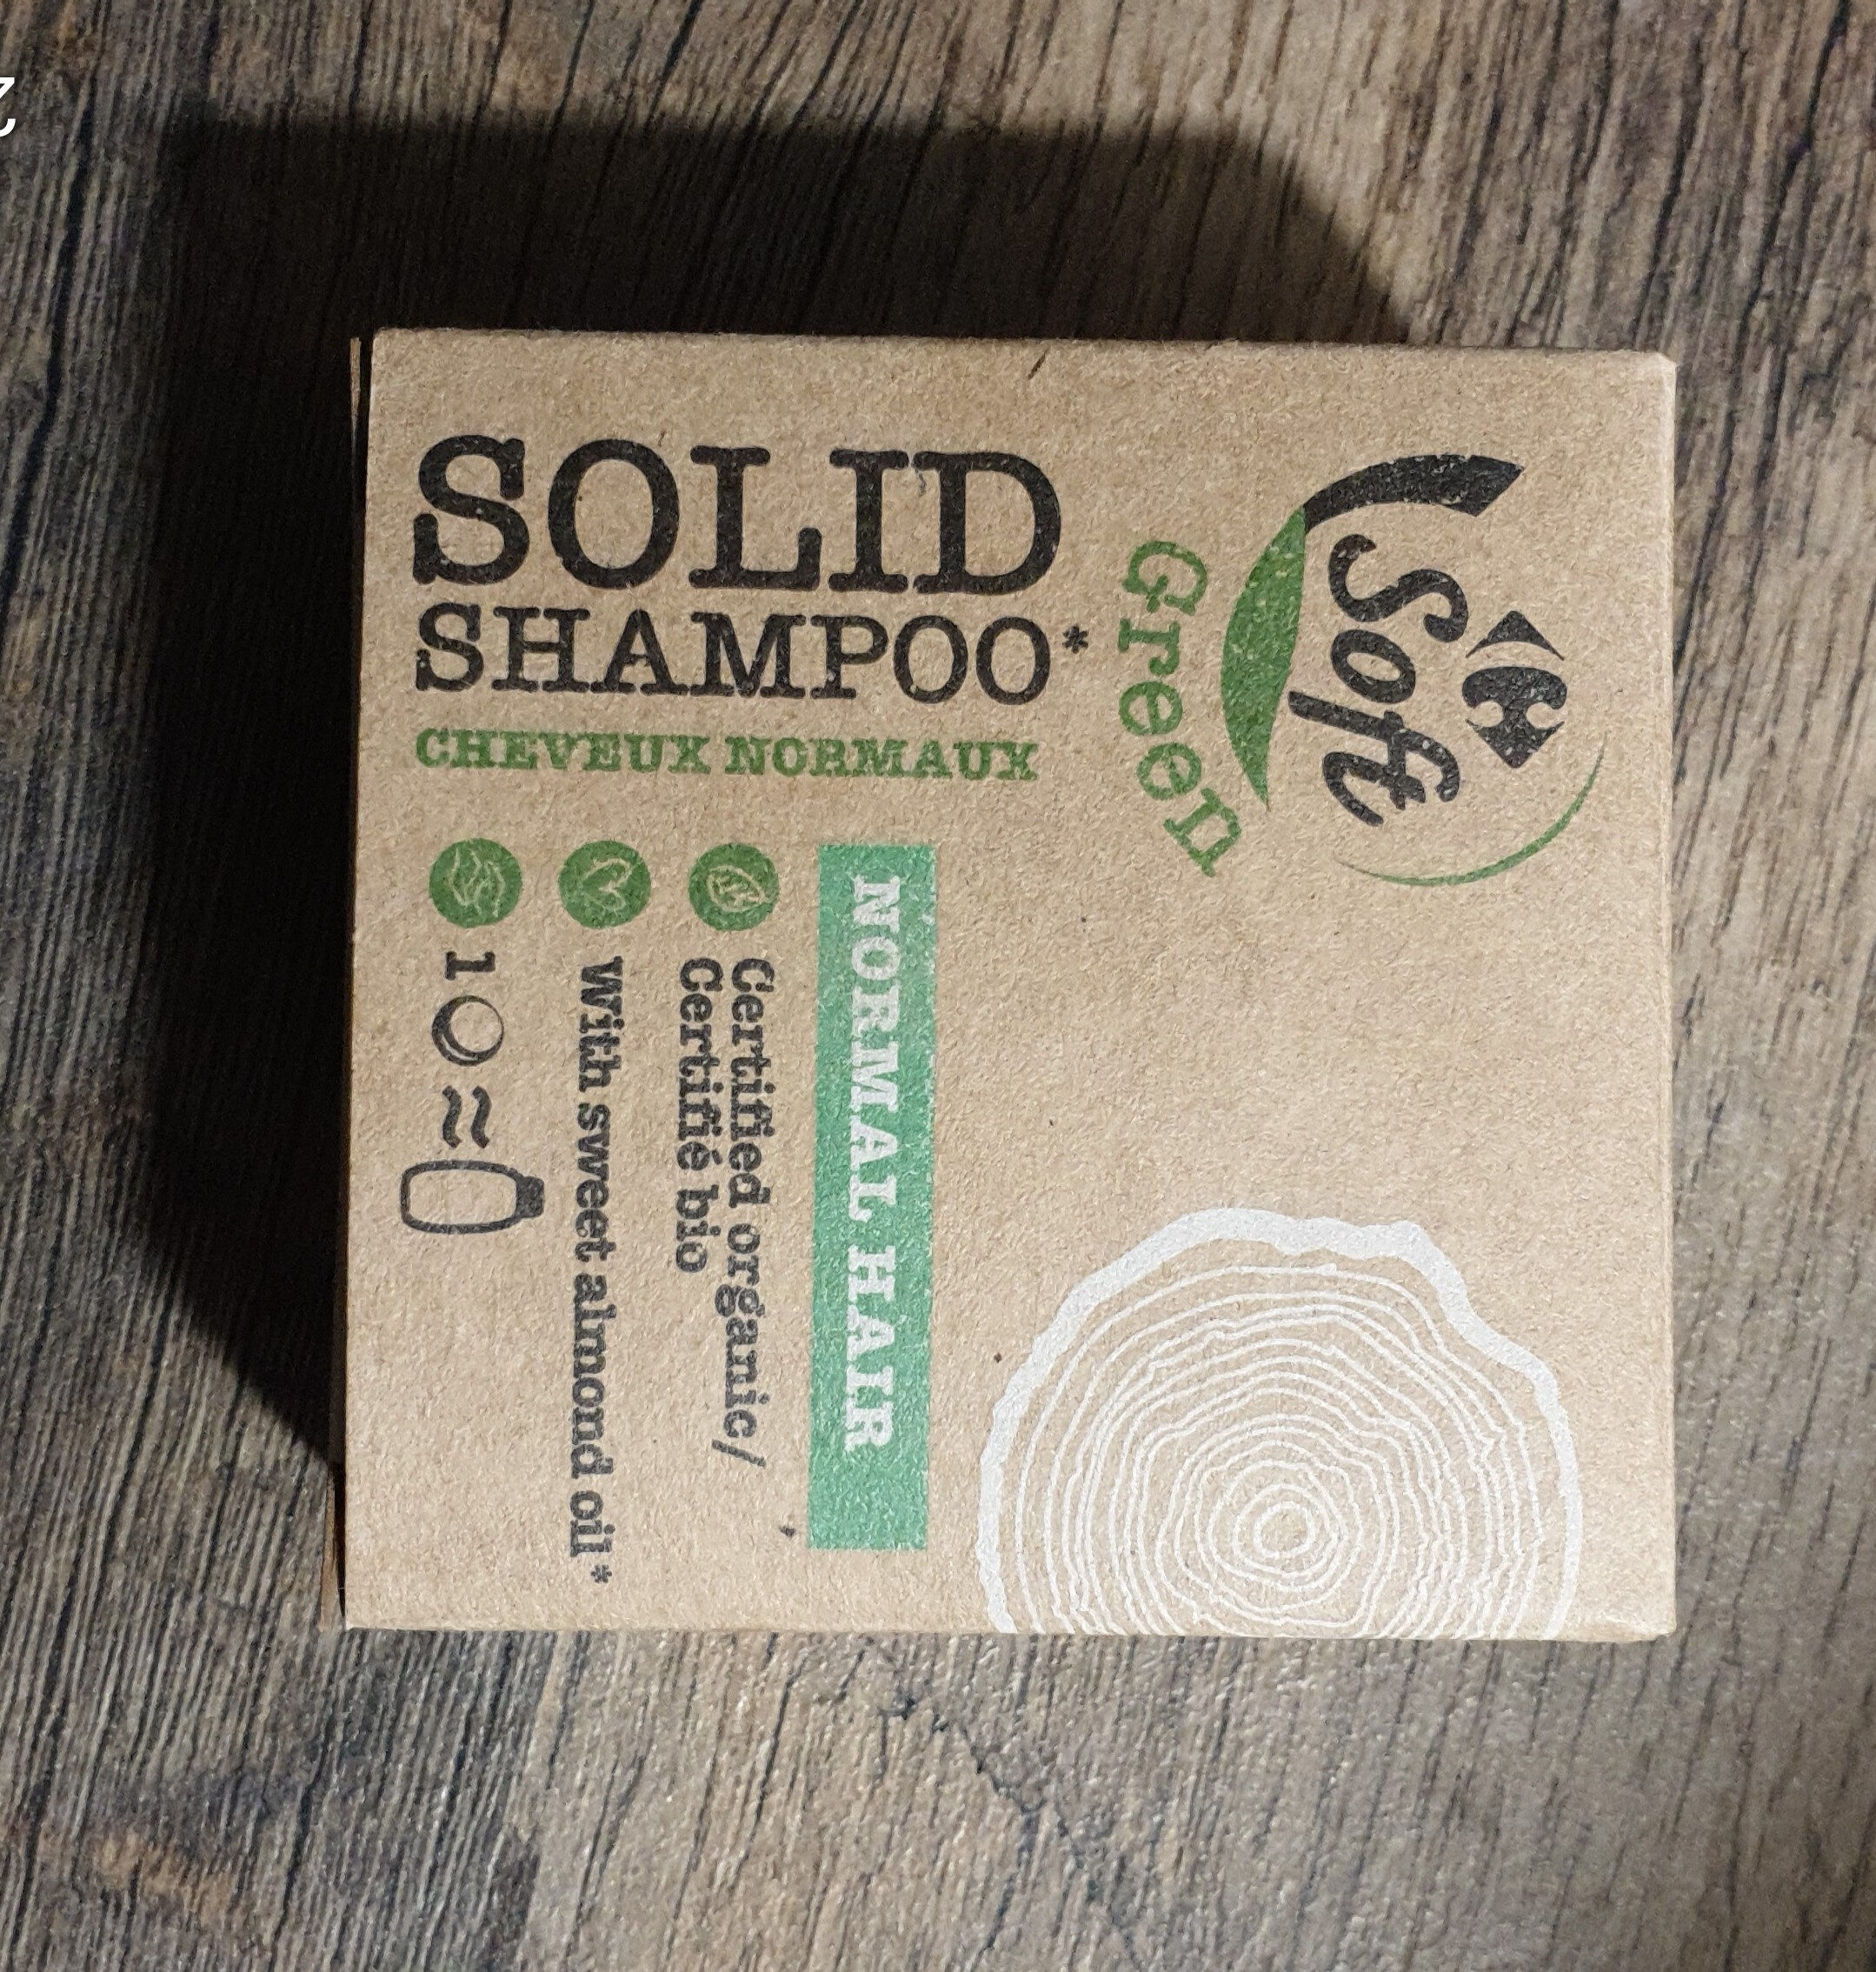 Solid SHAMPOO cheveux normaux - Produkt - fr